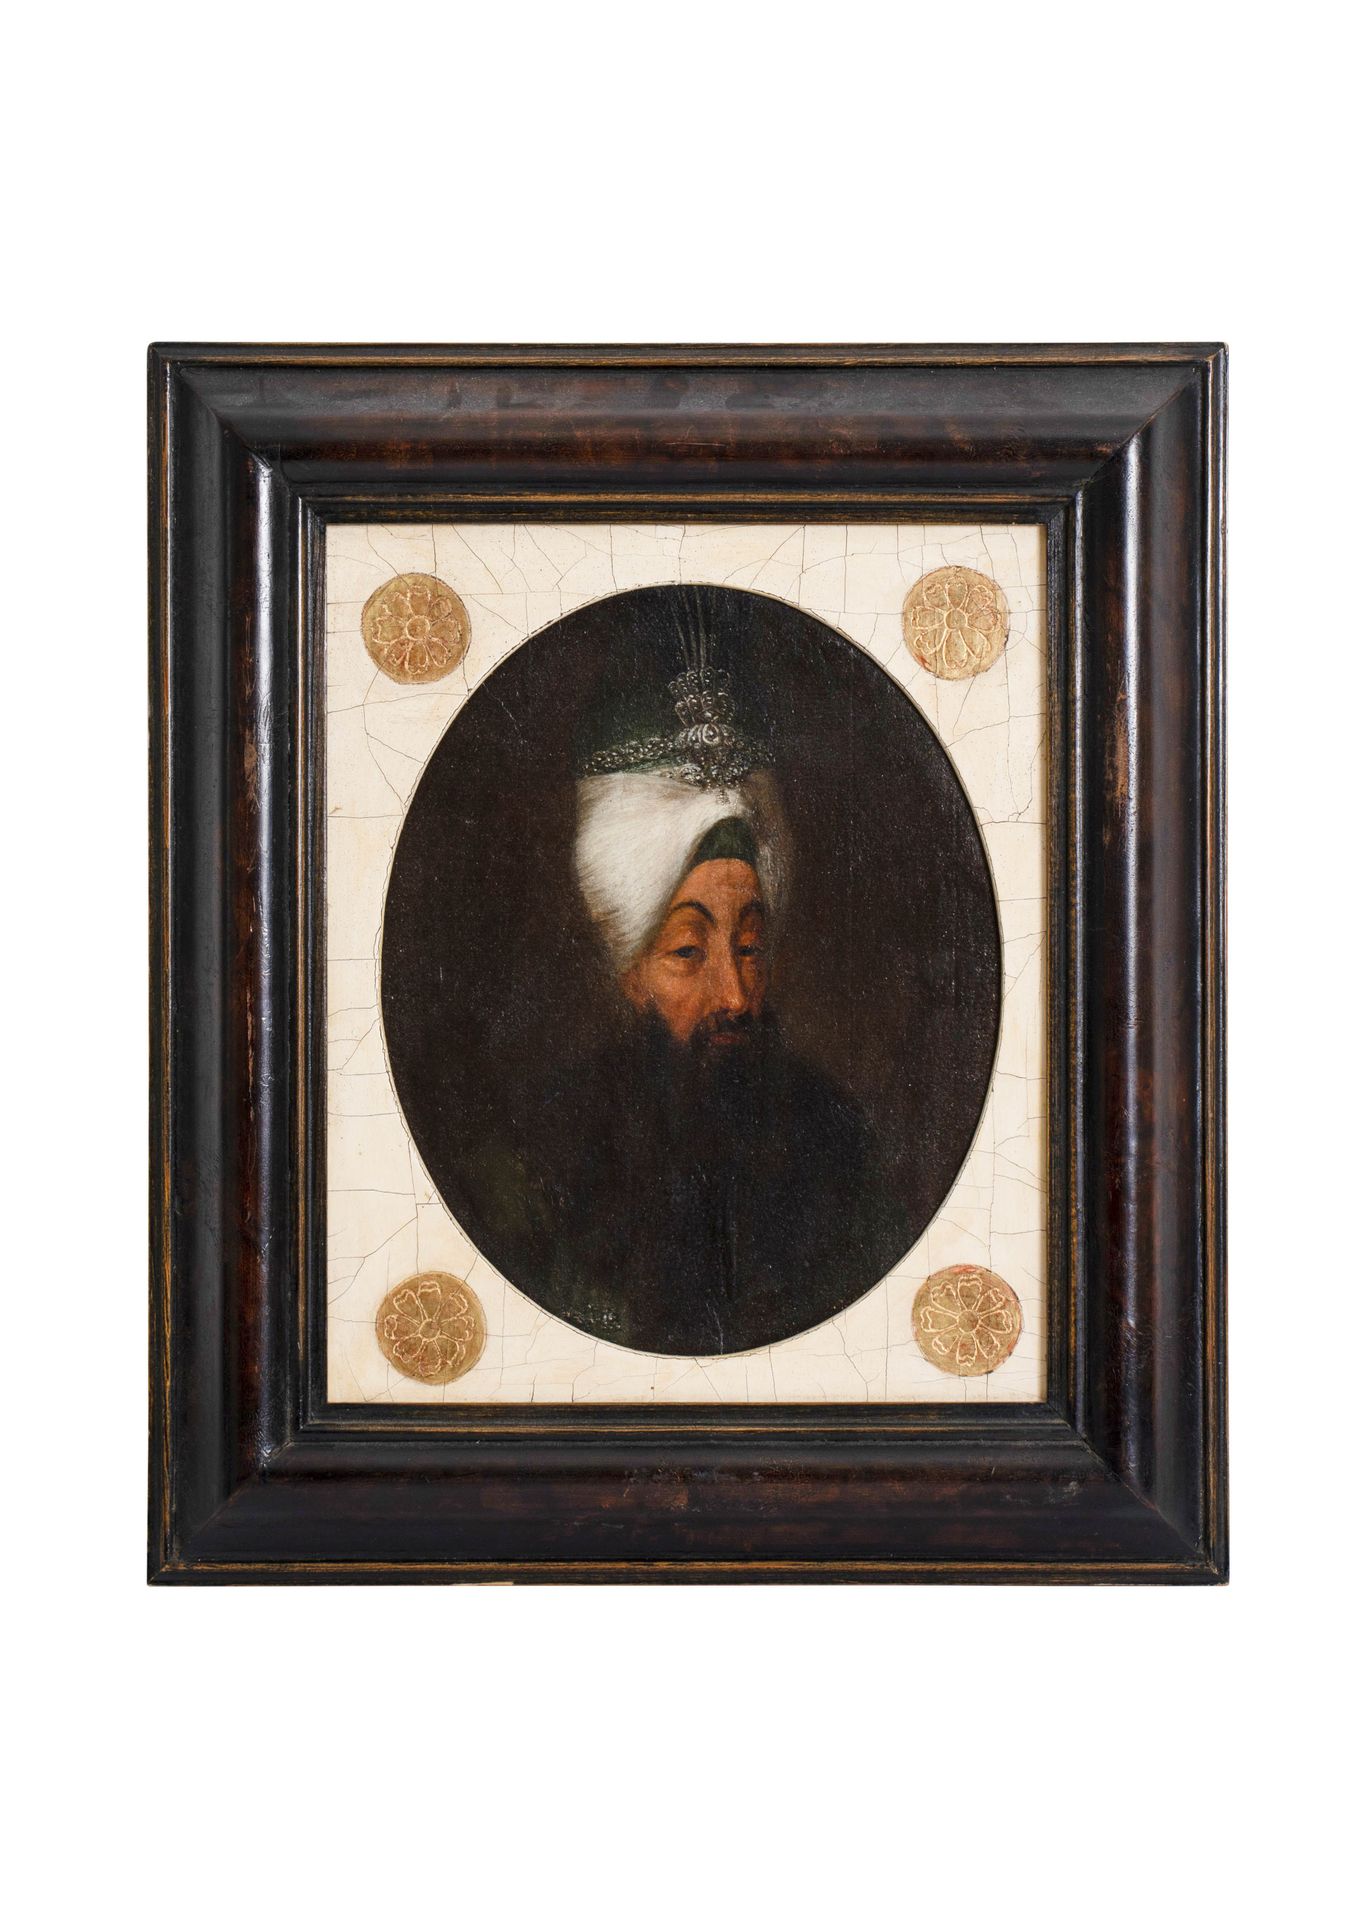 AN IMPORTANT OTTOMAN OIL PAINTING OF SULTAN ABDULHAMID I, 18TH CENTURY EIN WICHT&hellip;